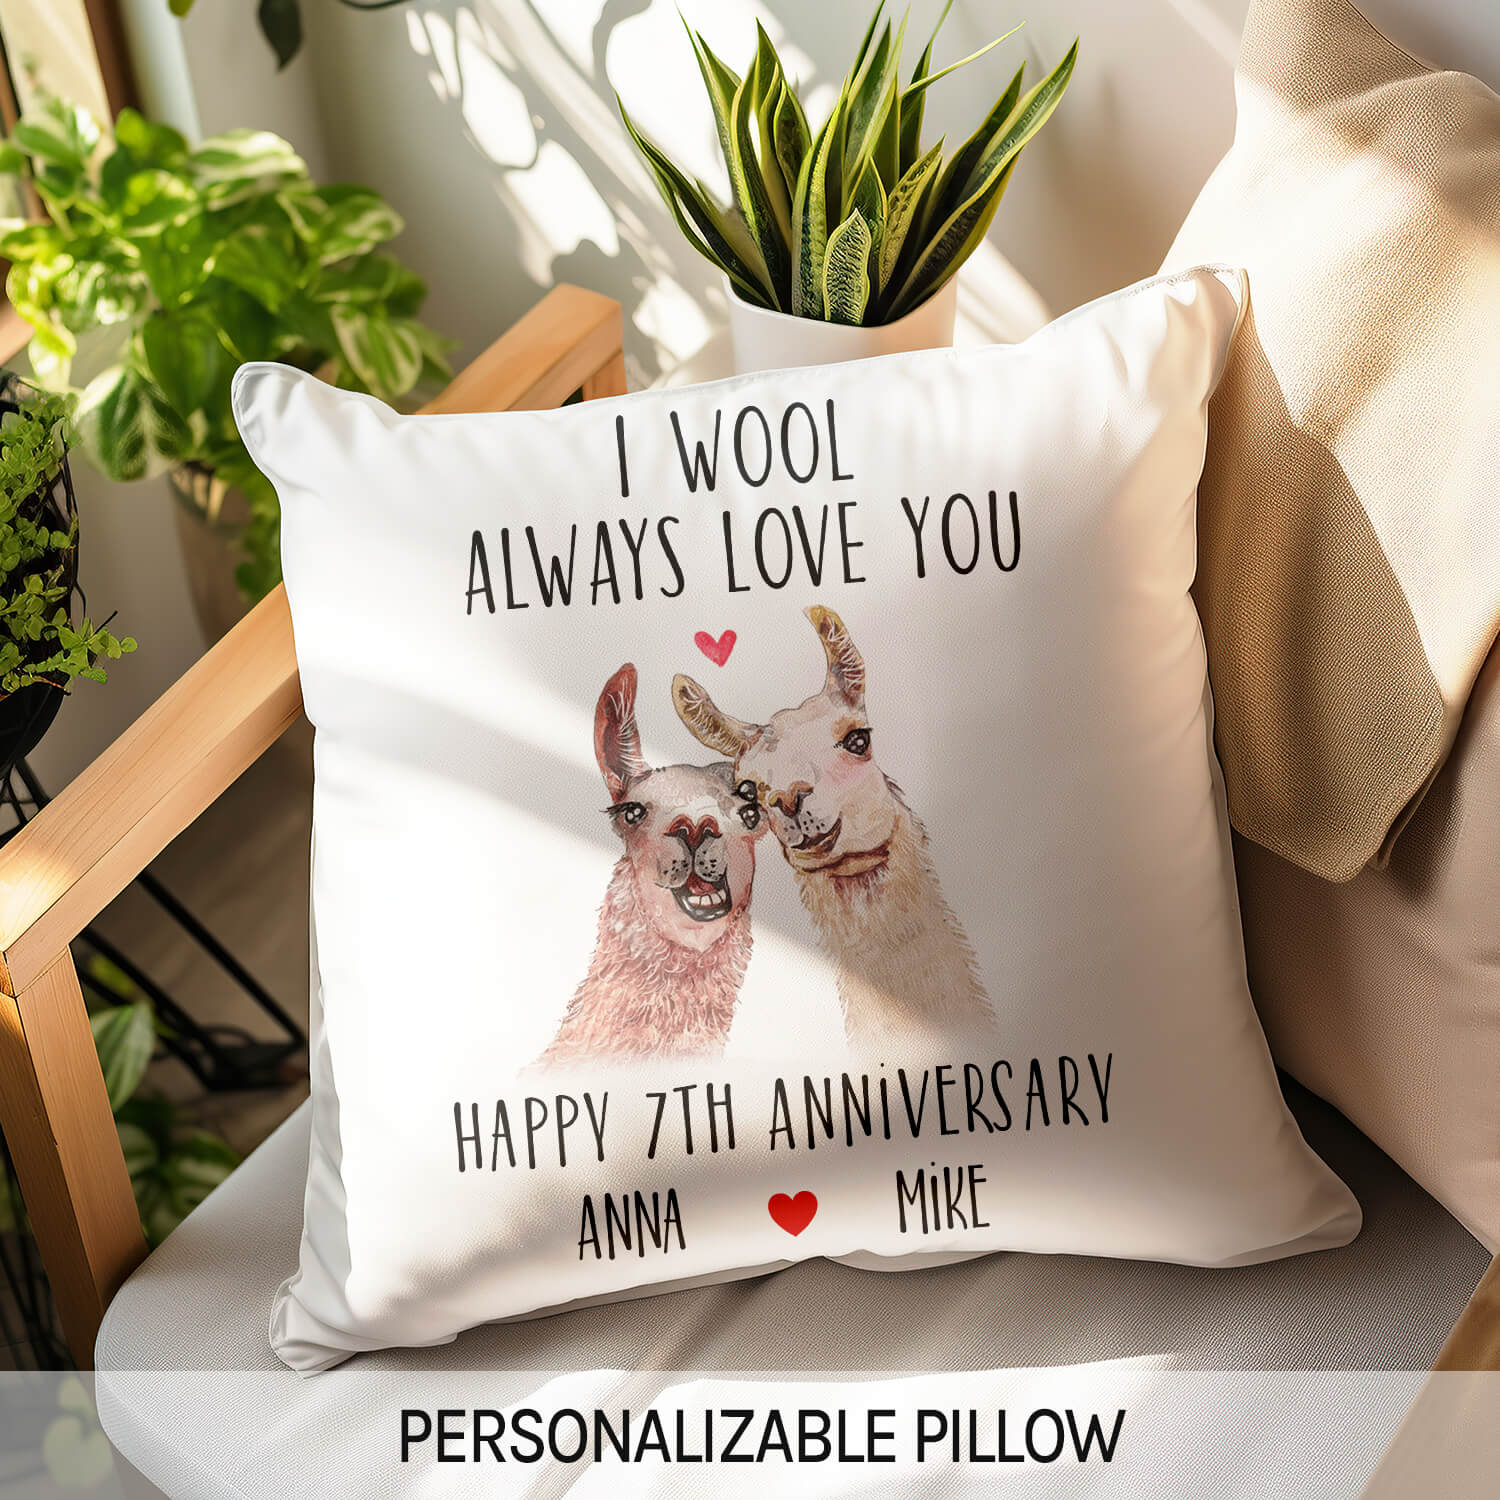 I Wool Always Love You - Personalized 7 Year Anniversary gift for Husband or Wife - Custom Pillow - MyMindfulGifts